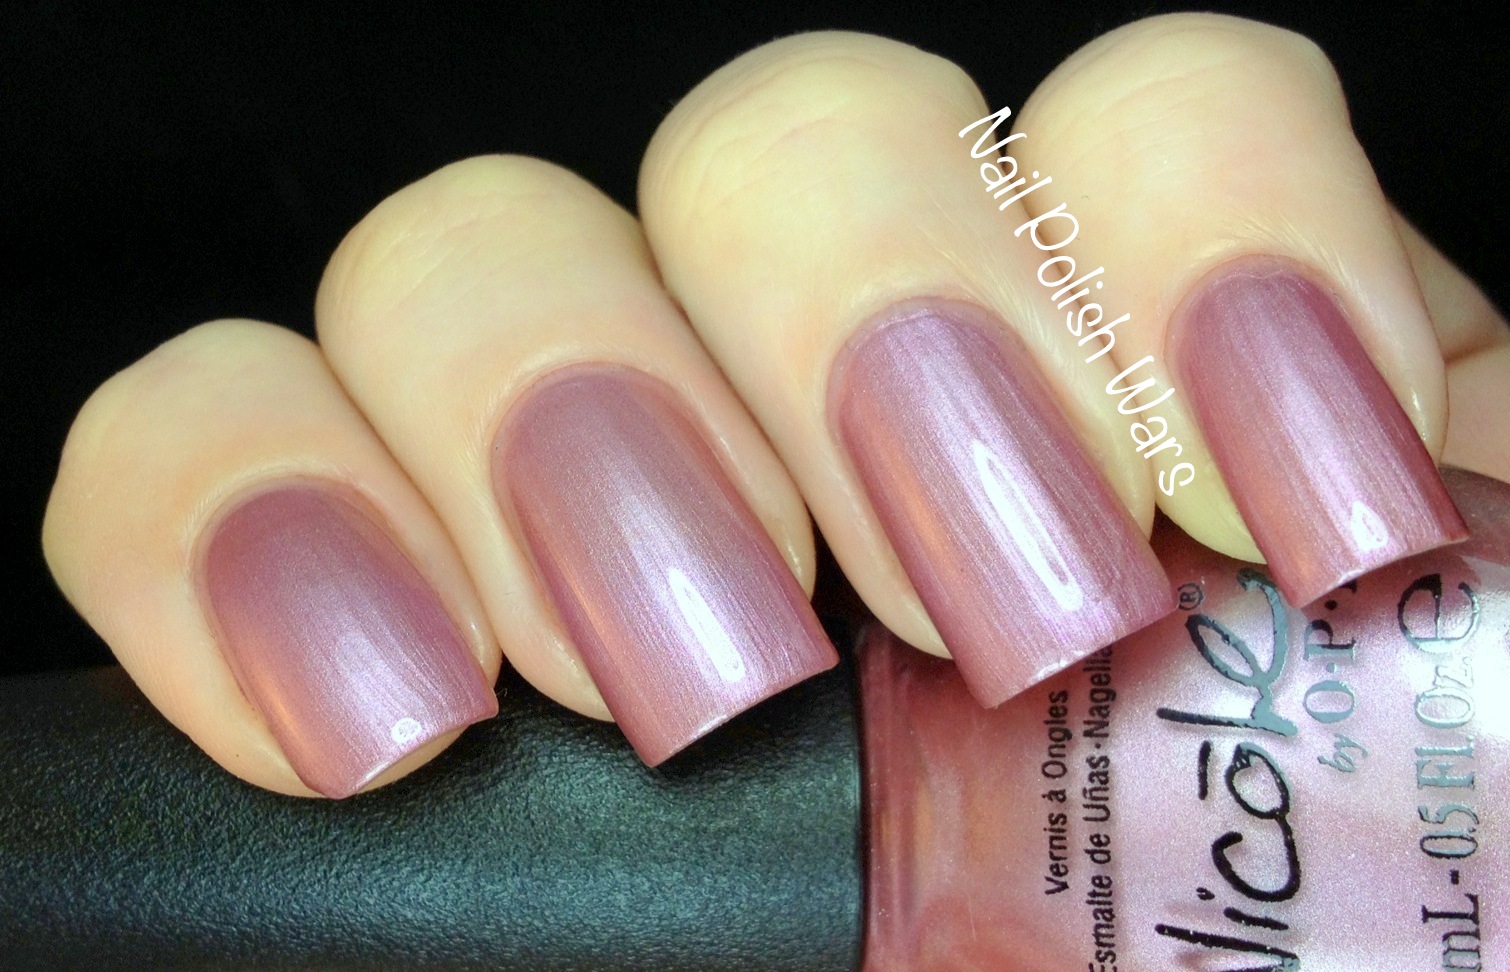 nail polish wars  nicole by opi cvs exclusives swatch  u0026 review